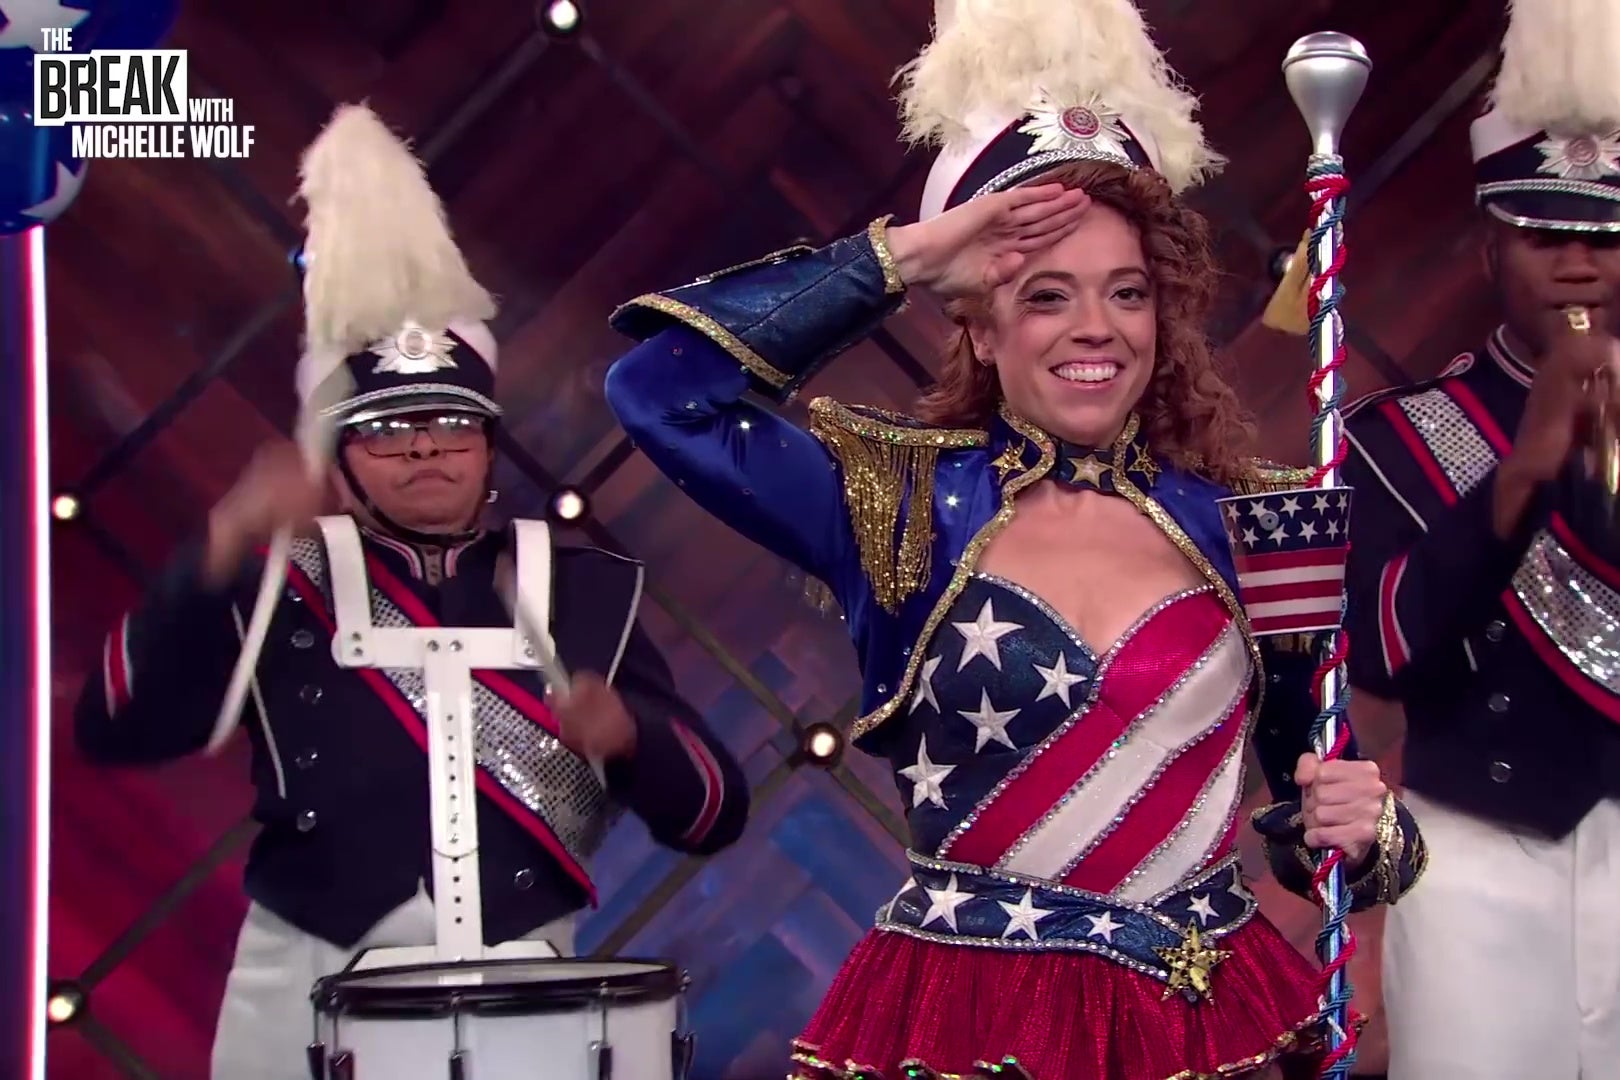 Michelle Wolf, dressed in red, white, and blue, salutes abortion as a marching band plays behind her.